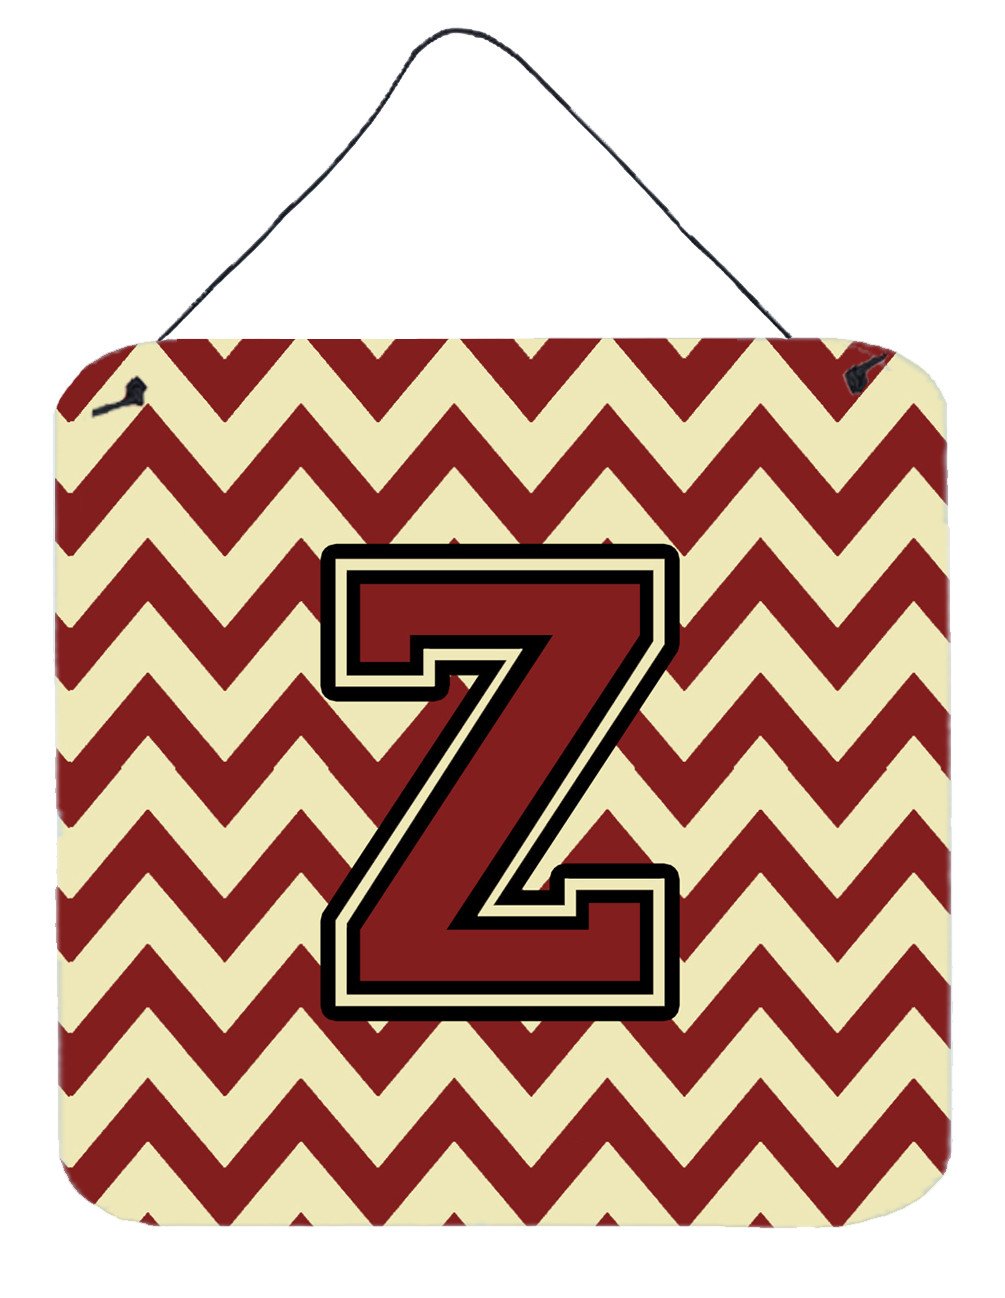 Letter Z Chevron Maroon and Gold Wall or Door Hanging Prints CJ1061-ZDS66 by Caroline's Treasures